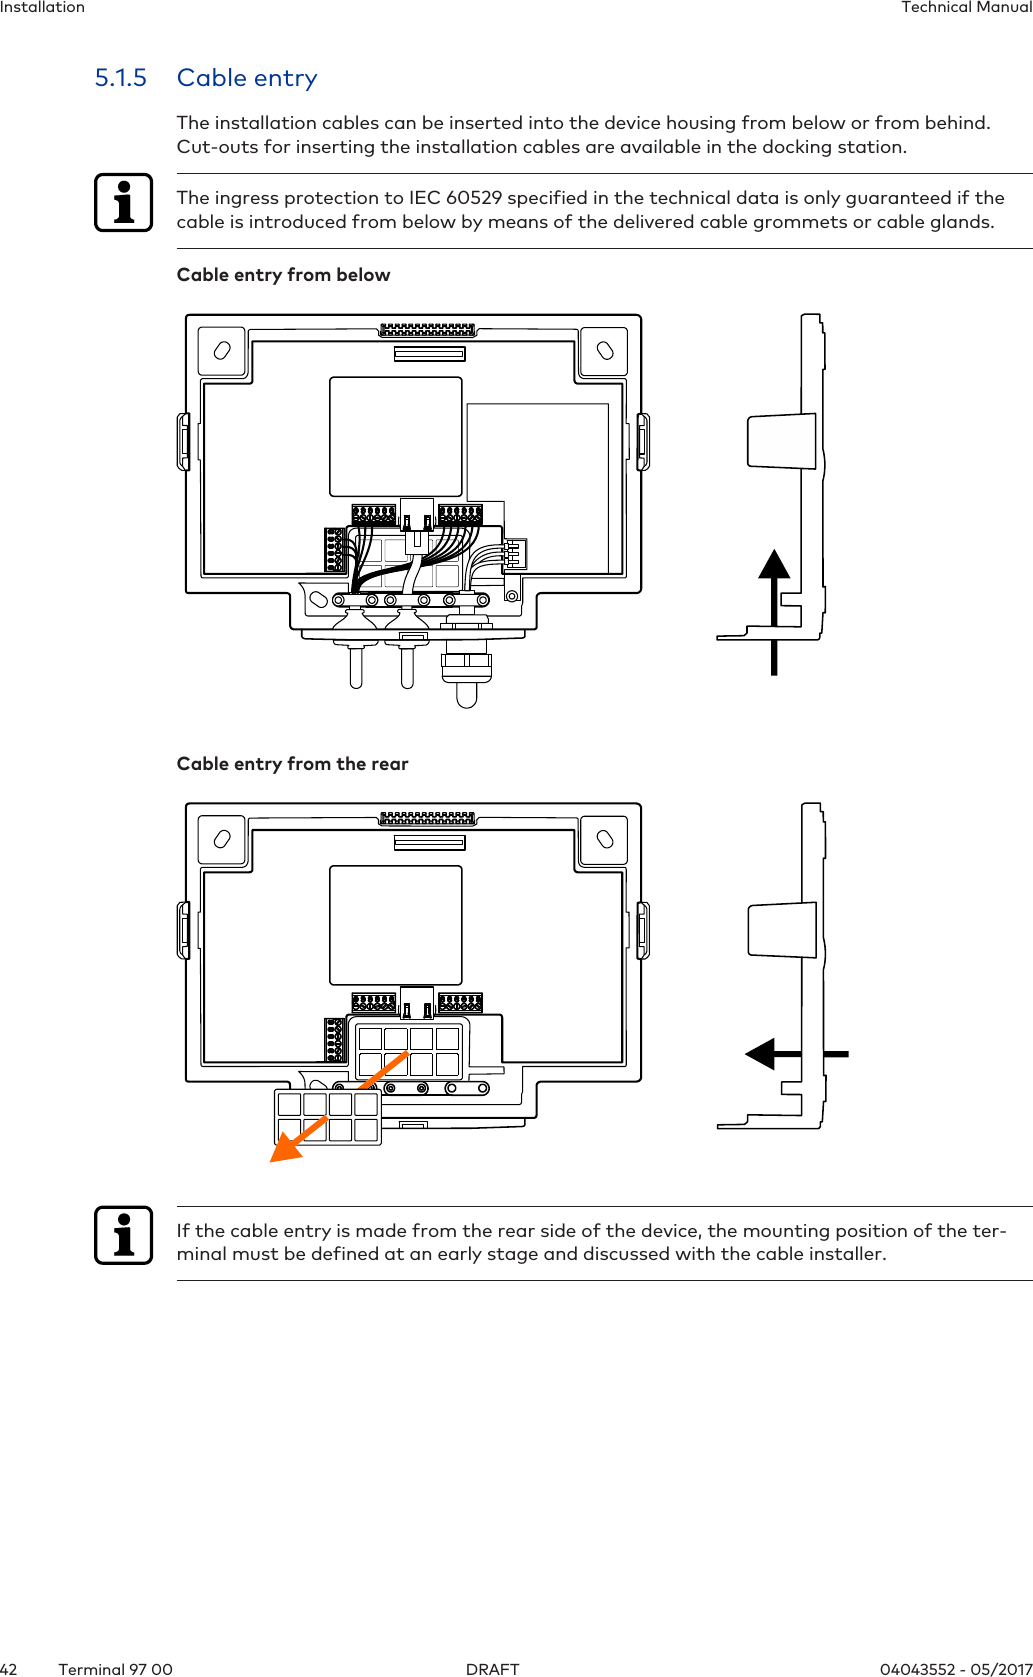 Installation Technical Manual42 04043552 - 05/2017Terminal 97 00 DRAFT5.1.5 Cable entryThe installation cables can be inserted into the device housing from below or from behind.Cut-outs for inserting the installation cables are available in the docking station.The ingress protection to IEC 60529 specified in the technical data is only guaranteed if thecable is introduced from below by means of the delivered cable grommets or cable glands.Cable entry from belowCable entry from the rearIf the cable entry is made from the rear side of the device, the mounting position of the ter-minal must be defined at an early stage and discussed with the cable installer.